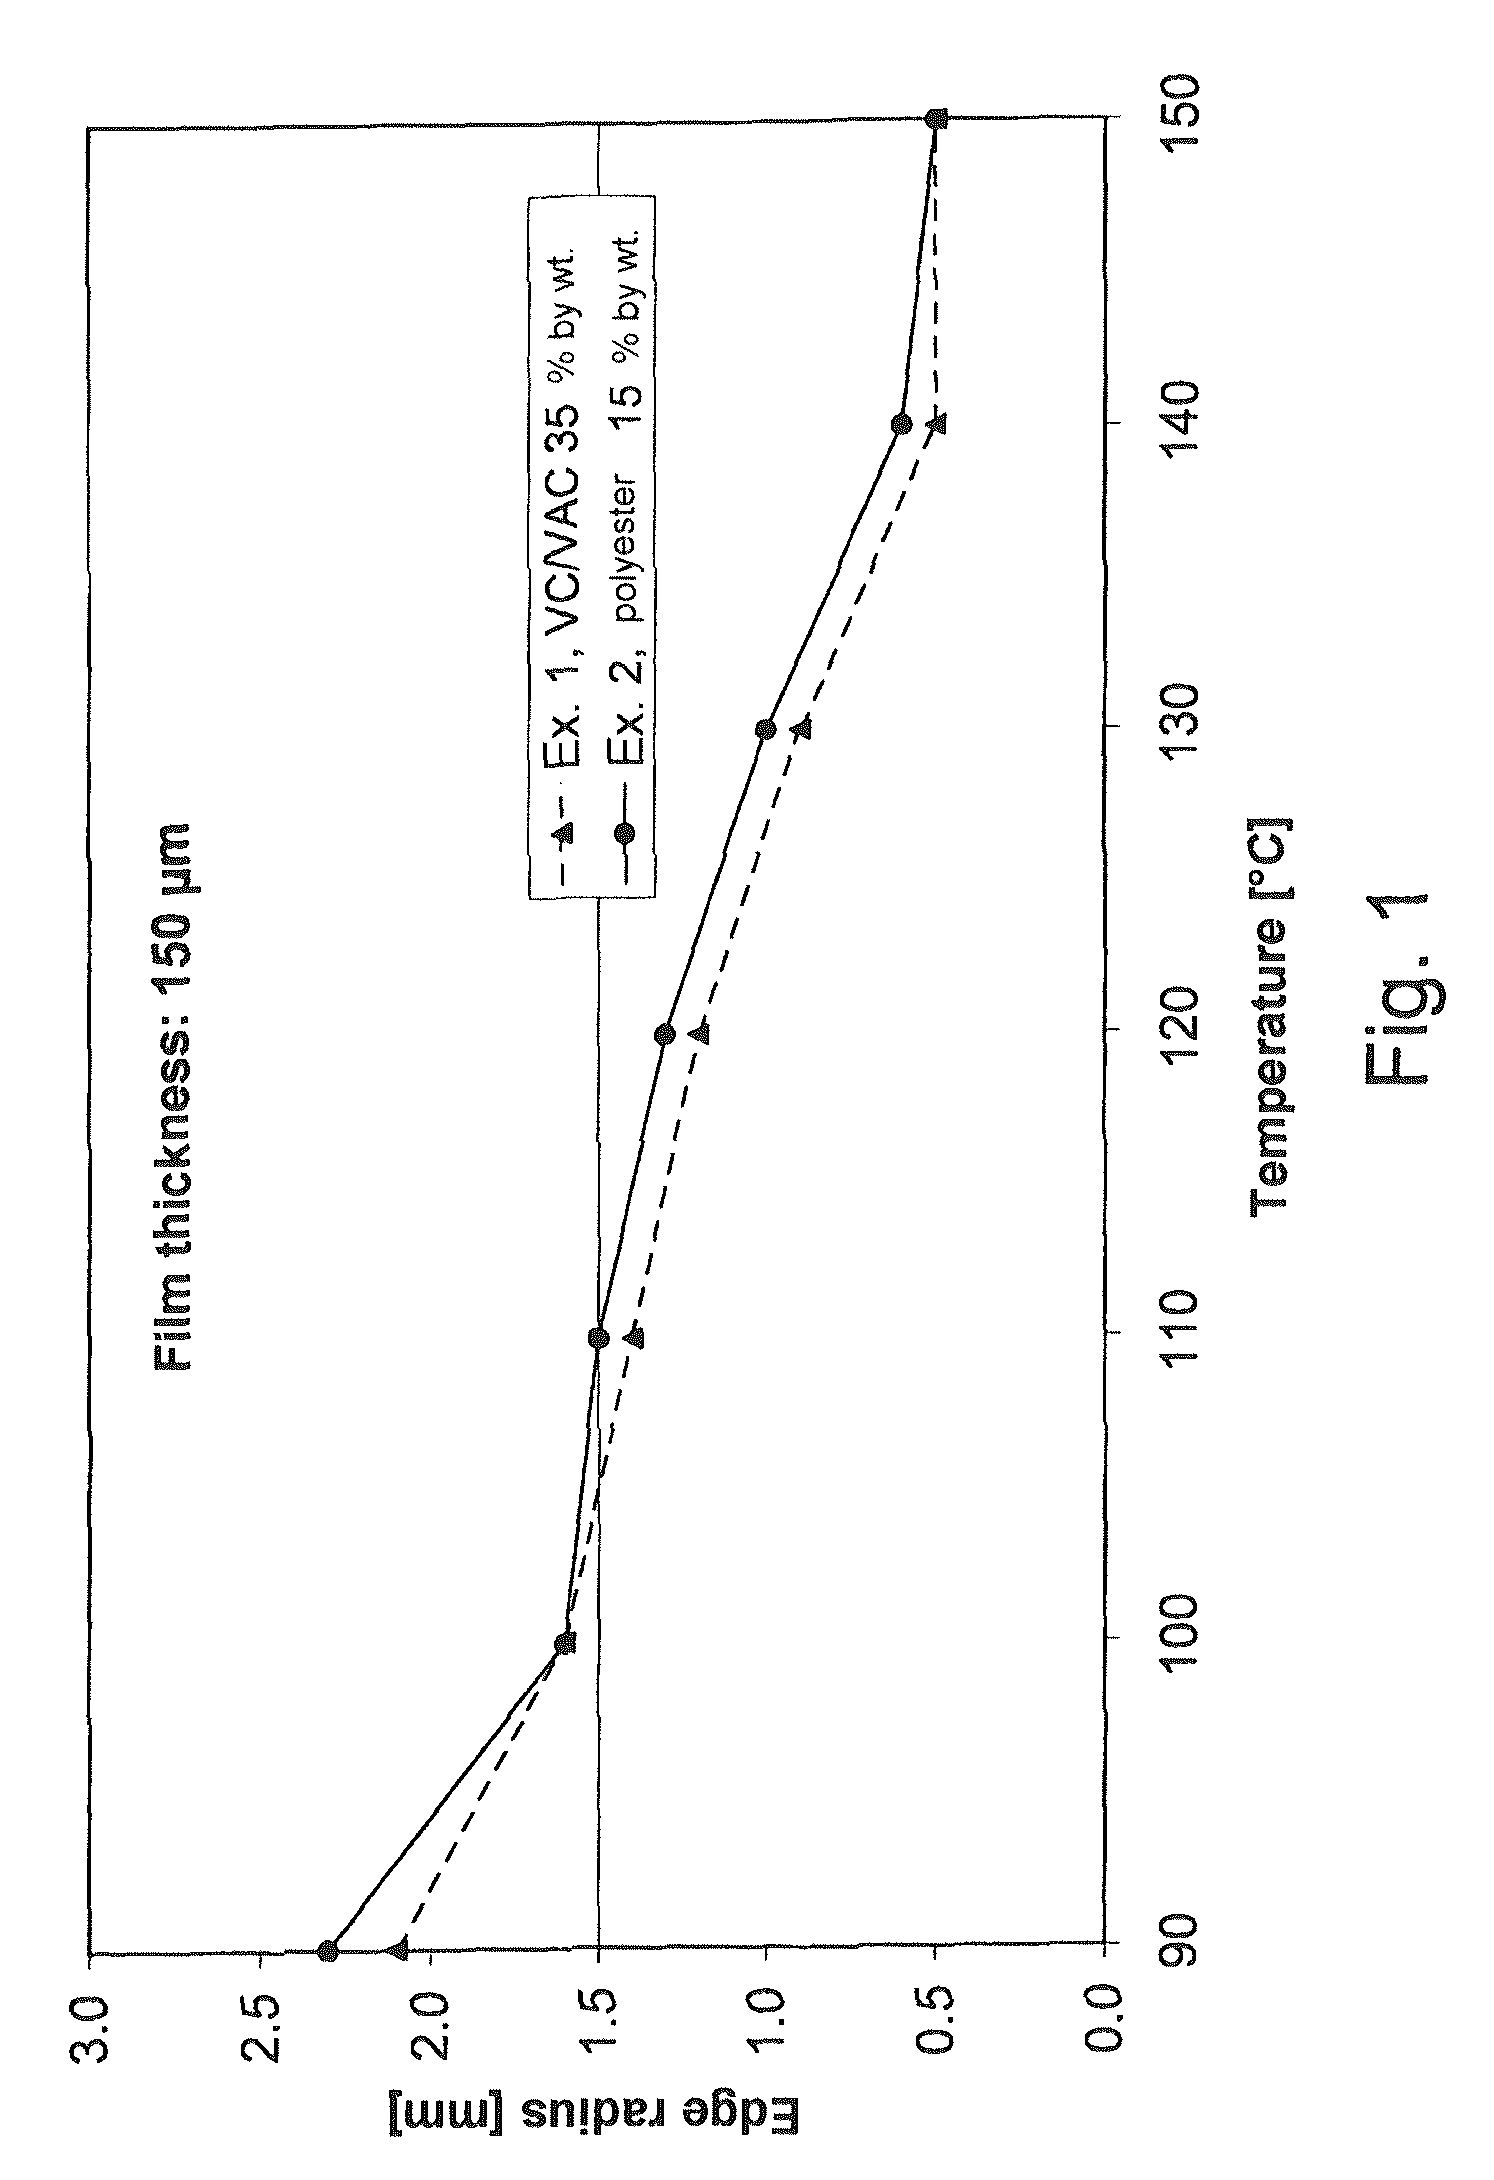 Vinyl chloride polymer film and method for producing same